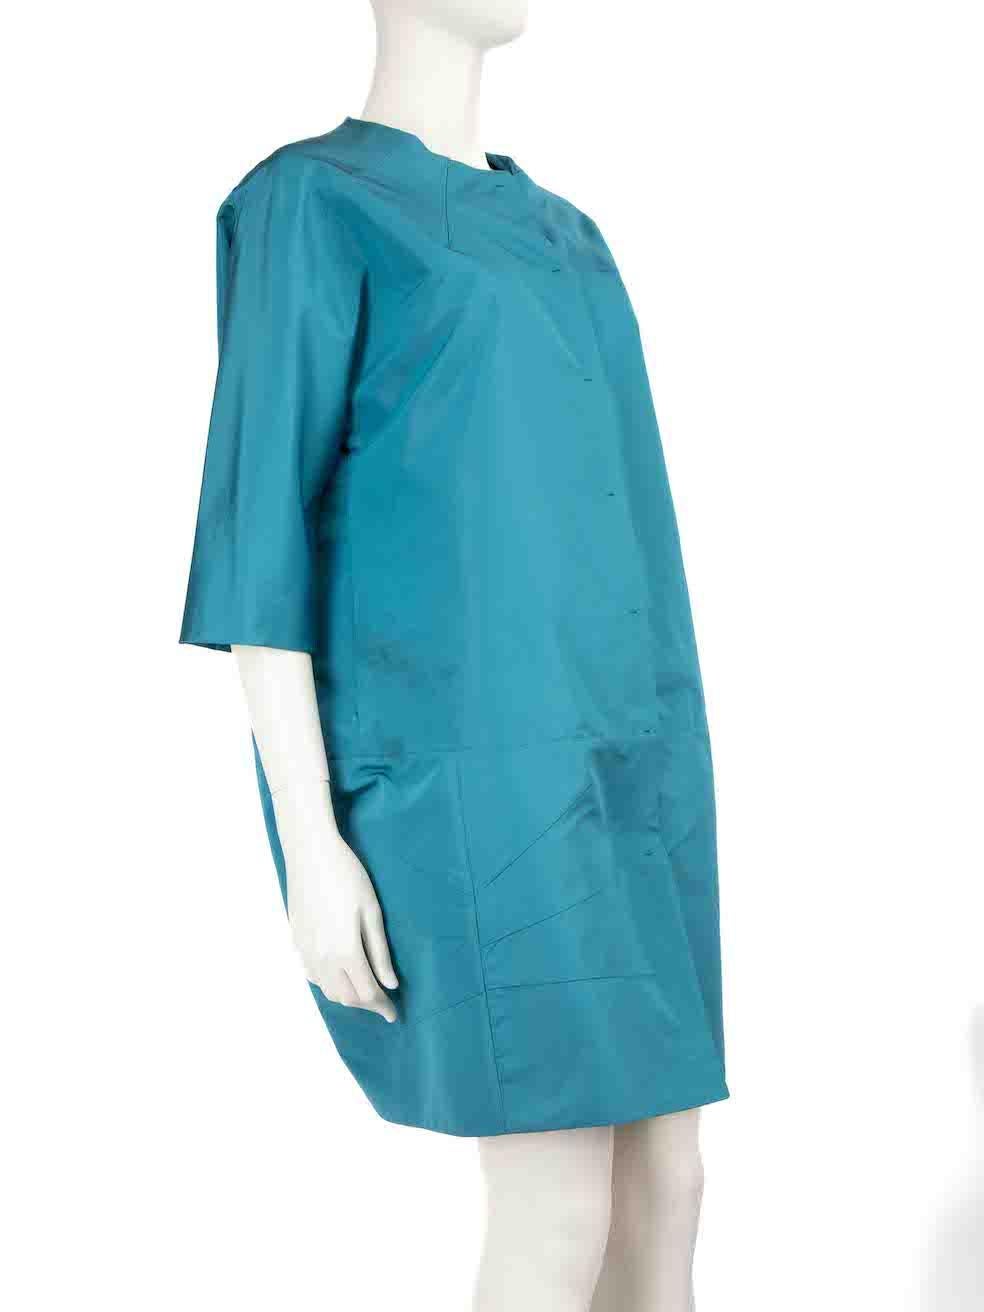 CONDITION is Good. Minor wear to coat is evident. Light discolouration to the front right side, internal rear neckline and the centre back on this used Prada designer resale item.
 
 
 
 Details
 
 
 Blue
 
 Silk
 
 Coat
 
 Long sleeves
 
 Round